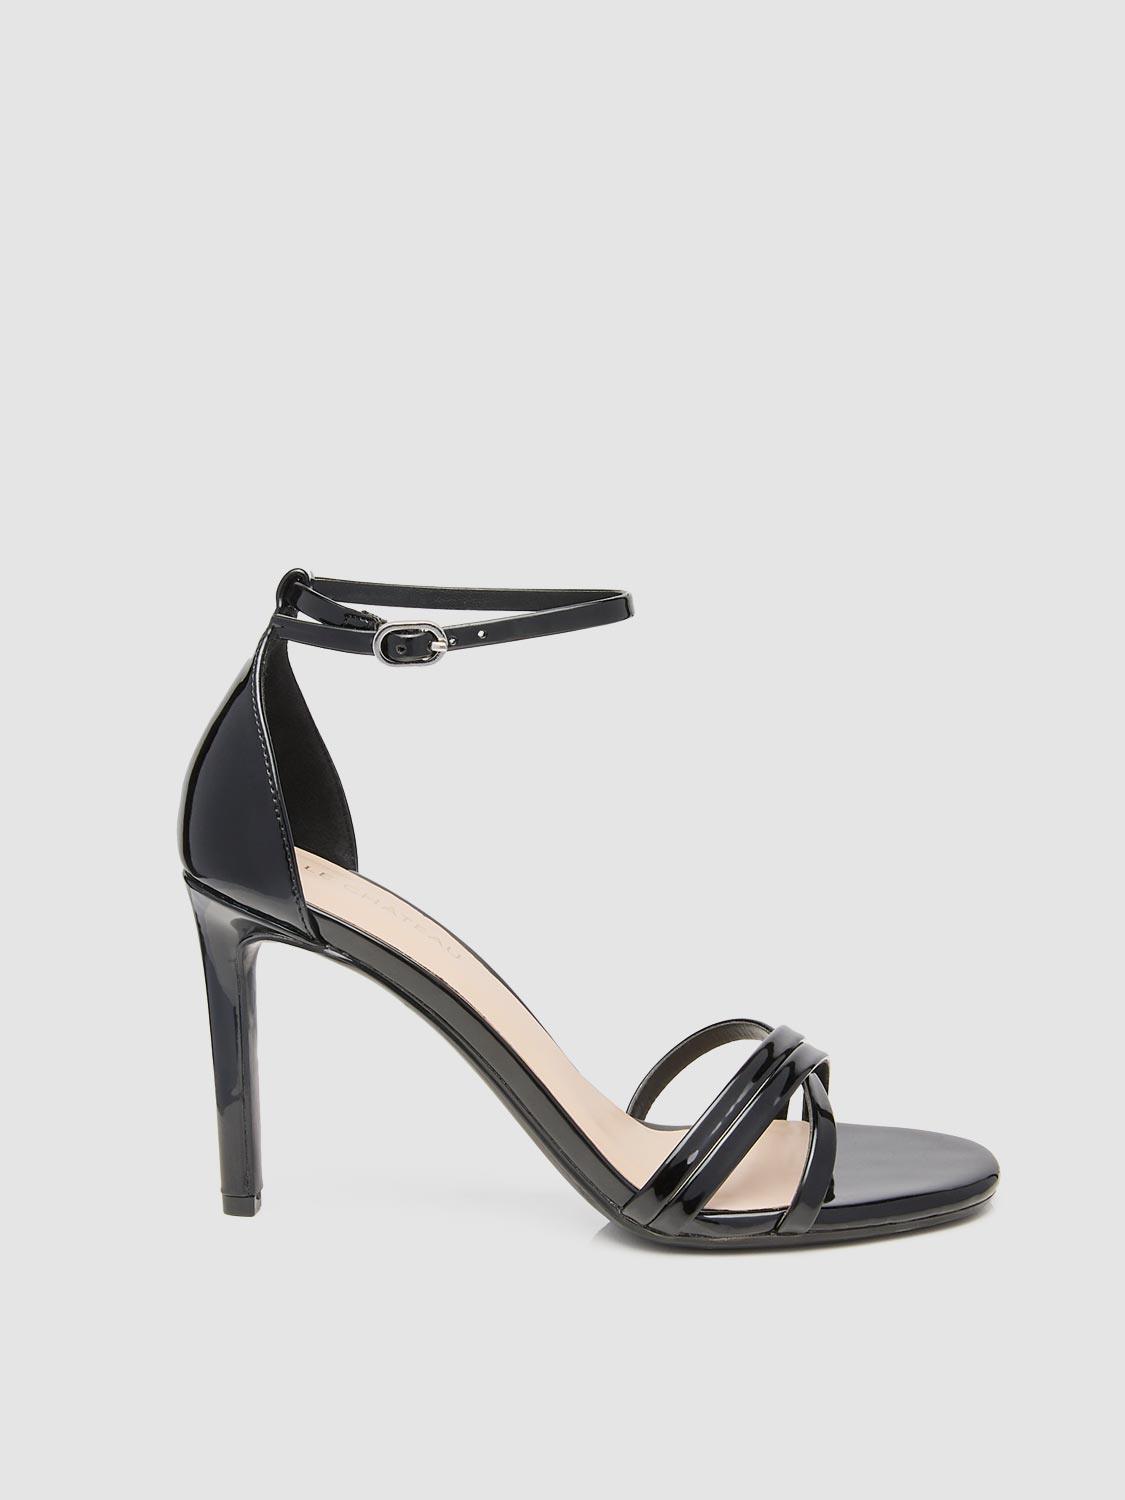 Round Toe Patent Leather Strappy Stiletto High Heel Sandal